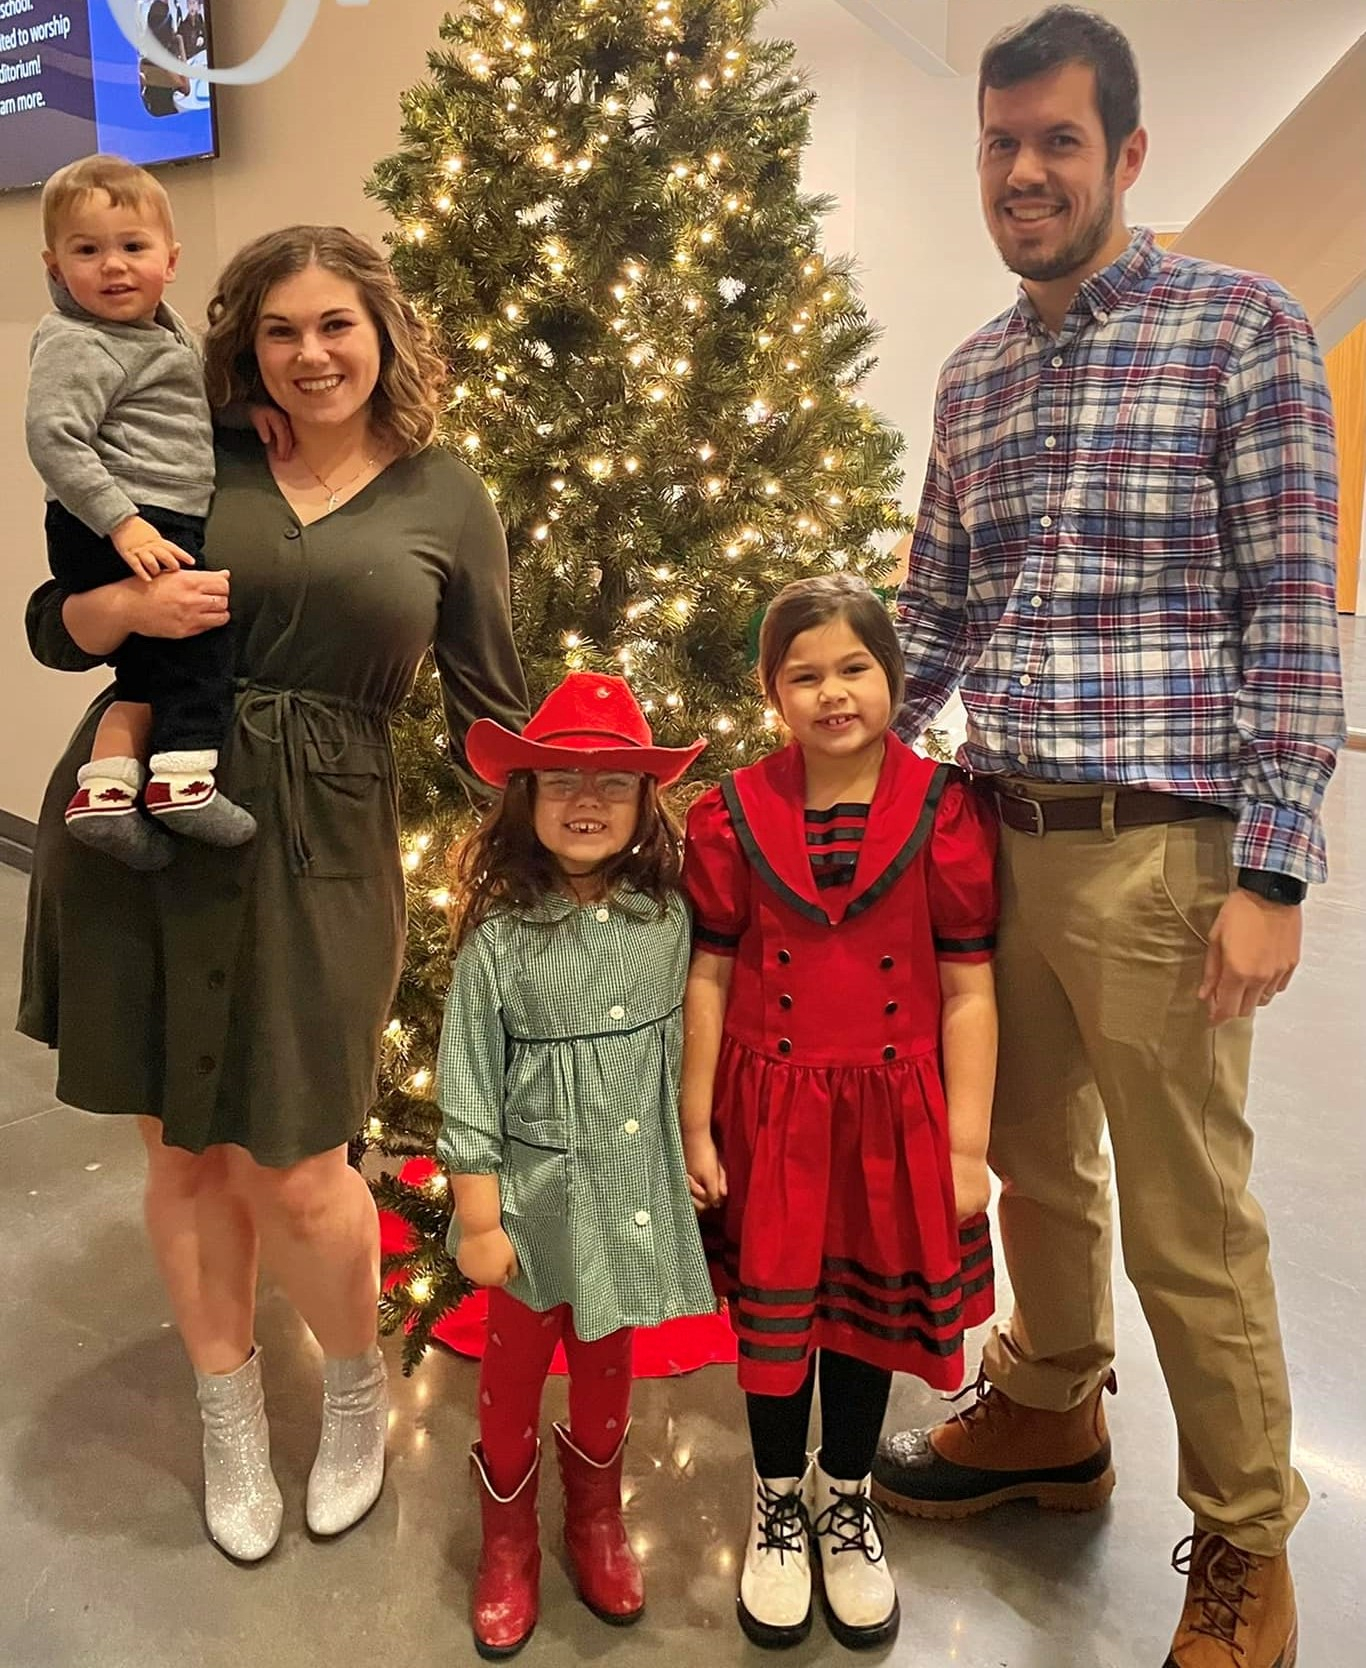 Dr. Hubbard and his wife and three children standing by a holiday tree